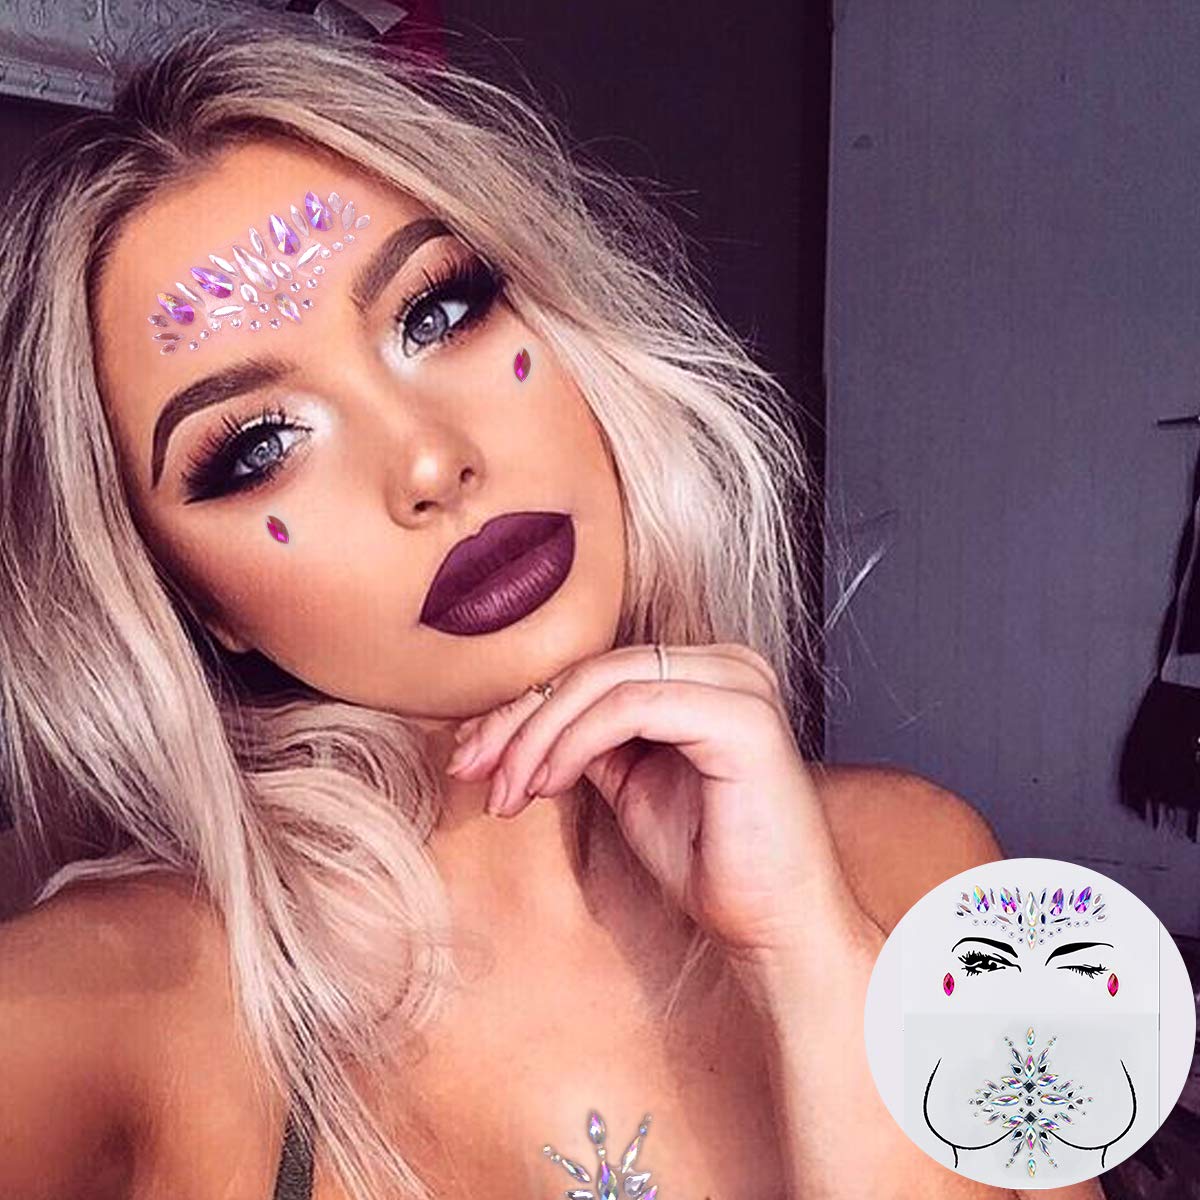 Women Mermaid Face Jewels with Chest Gems , Crystals Face Jewels Stick on Eyes Face Body Fit for Festival Music Party Makeup